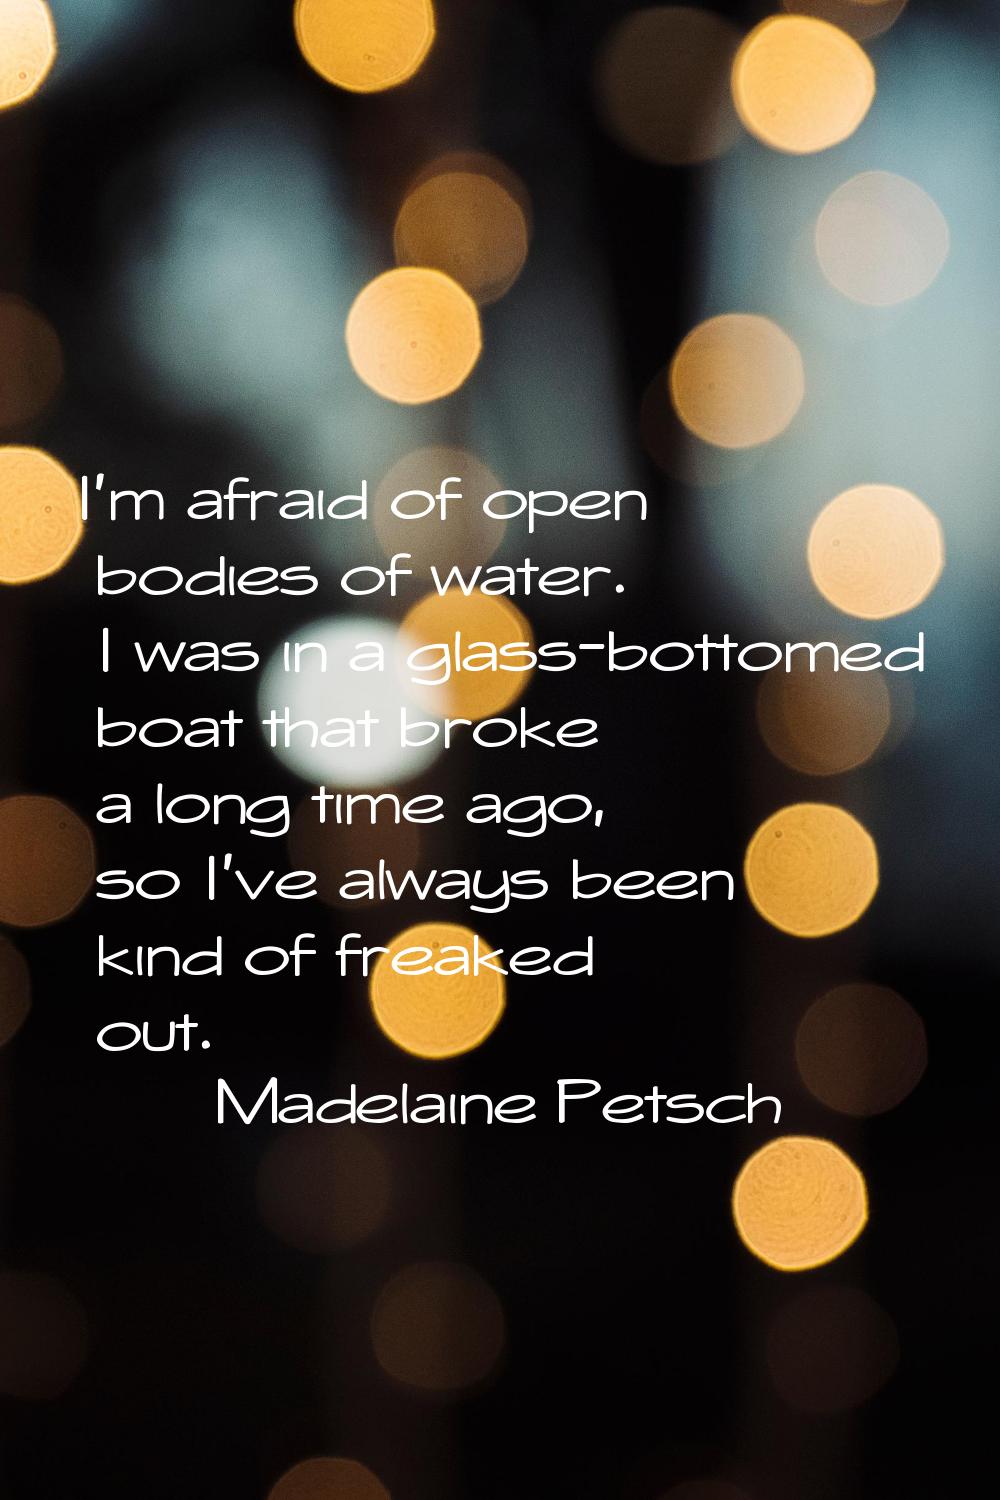 I'm afraid of open bodies of water. I was in a glass-bottomed boat that broke a long time ago, so I